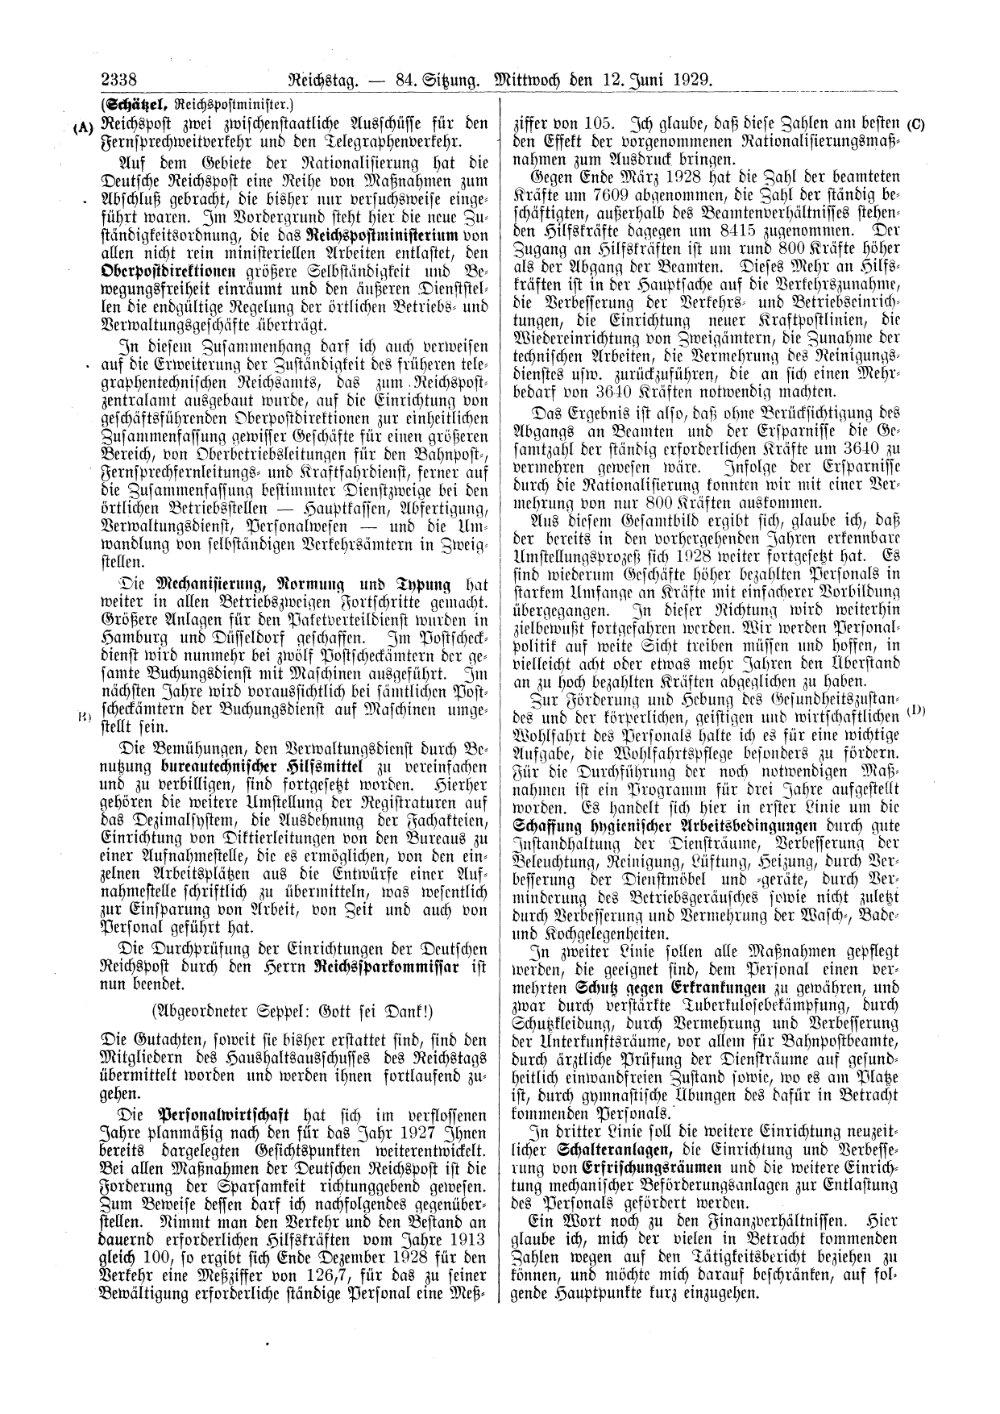 Scan of page 2338